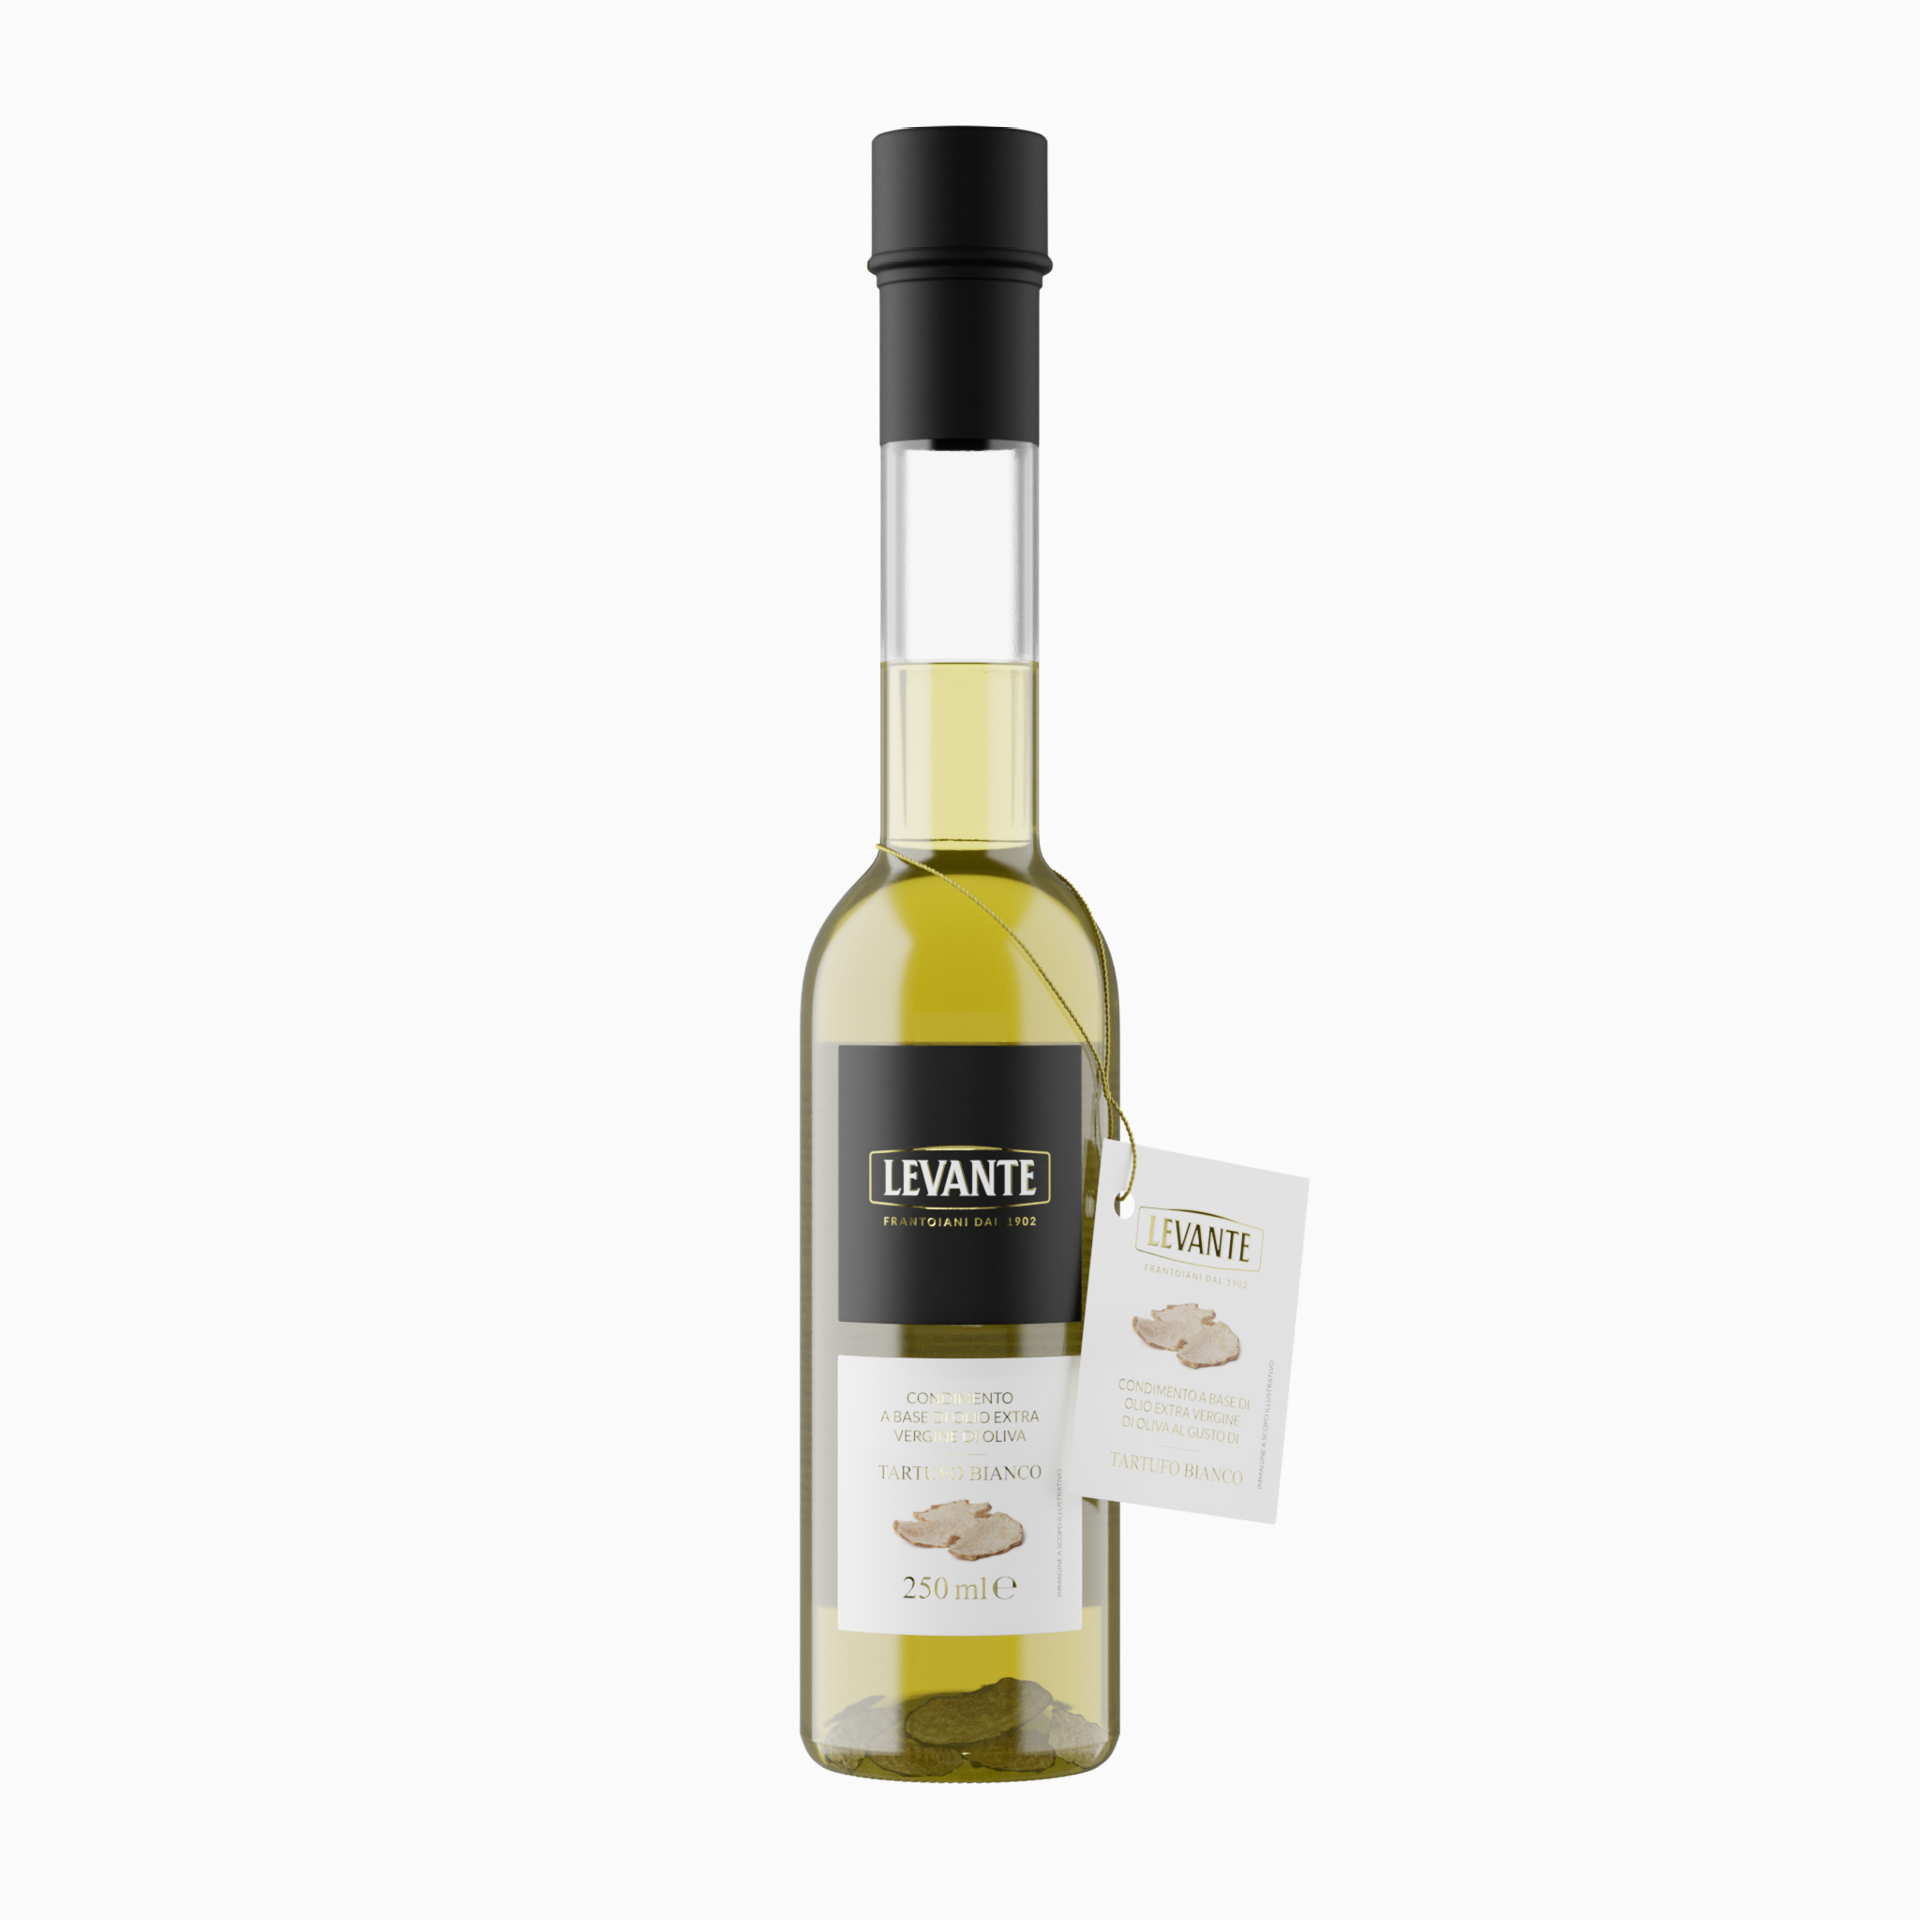 Extra Virgin Olive Oil flavoured with White Truffle